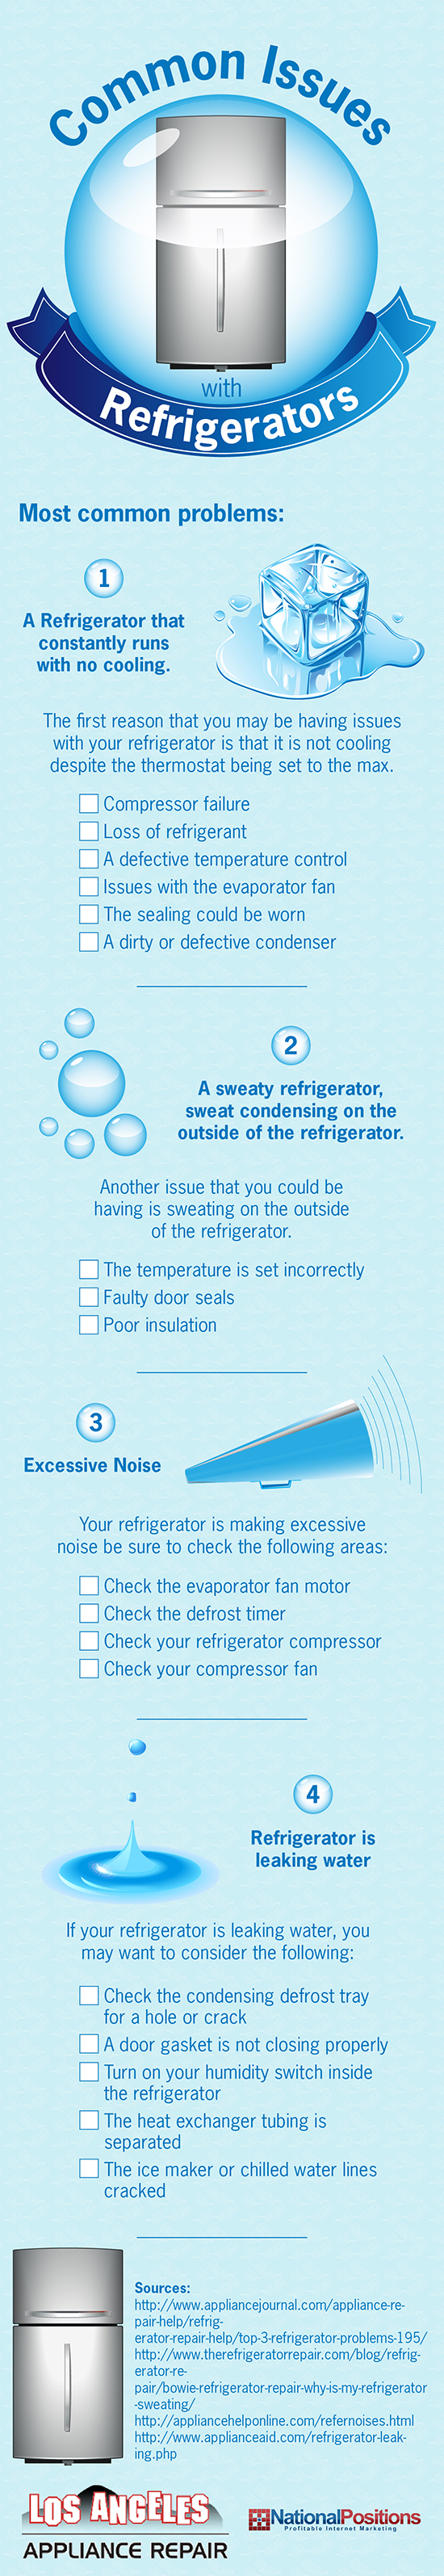 Common Issues With Refrigerators